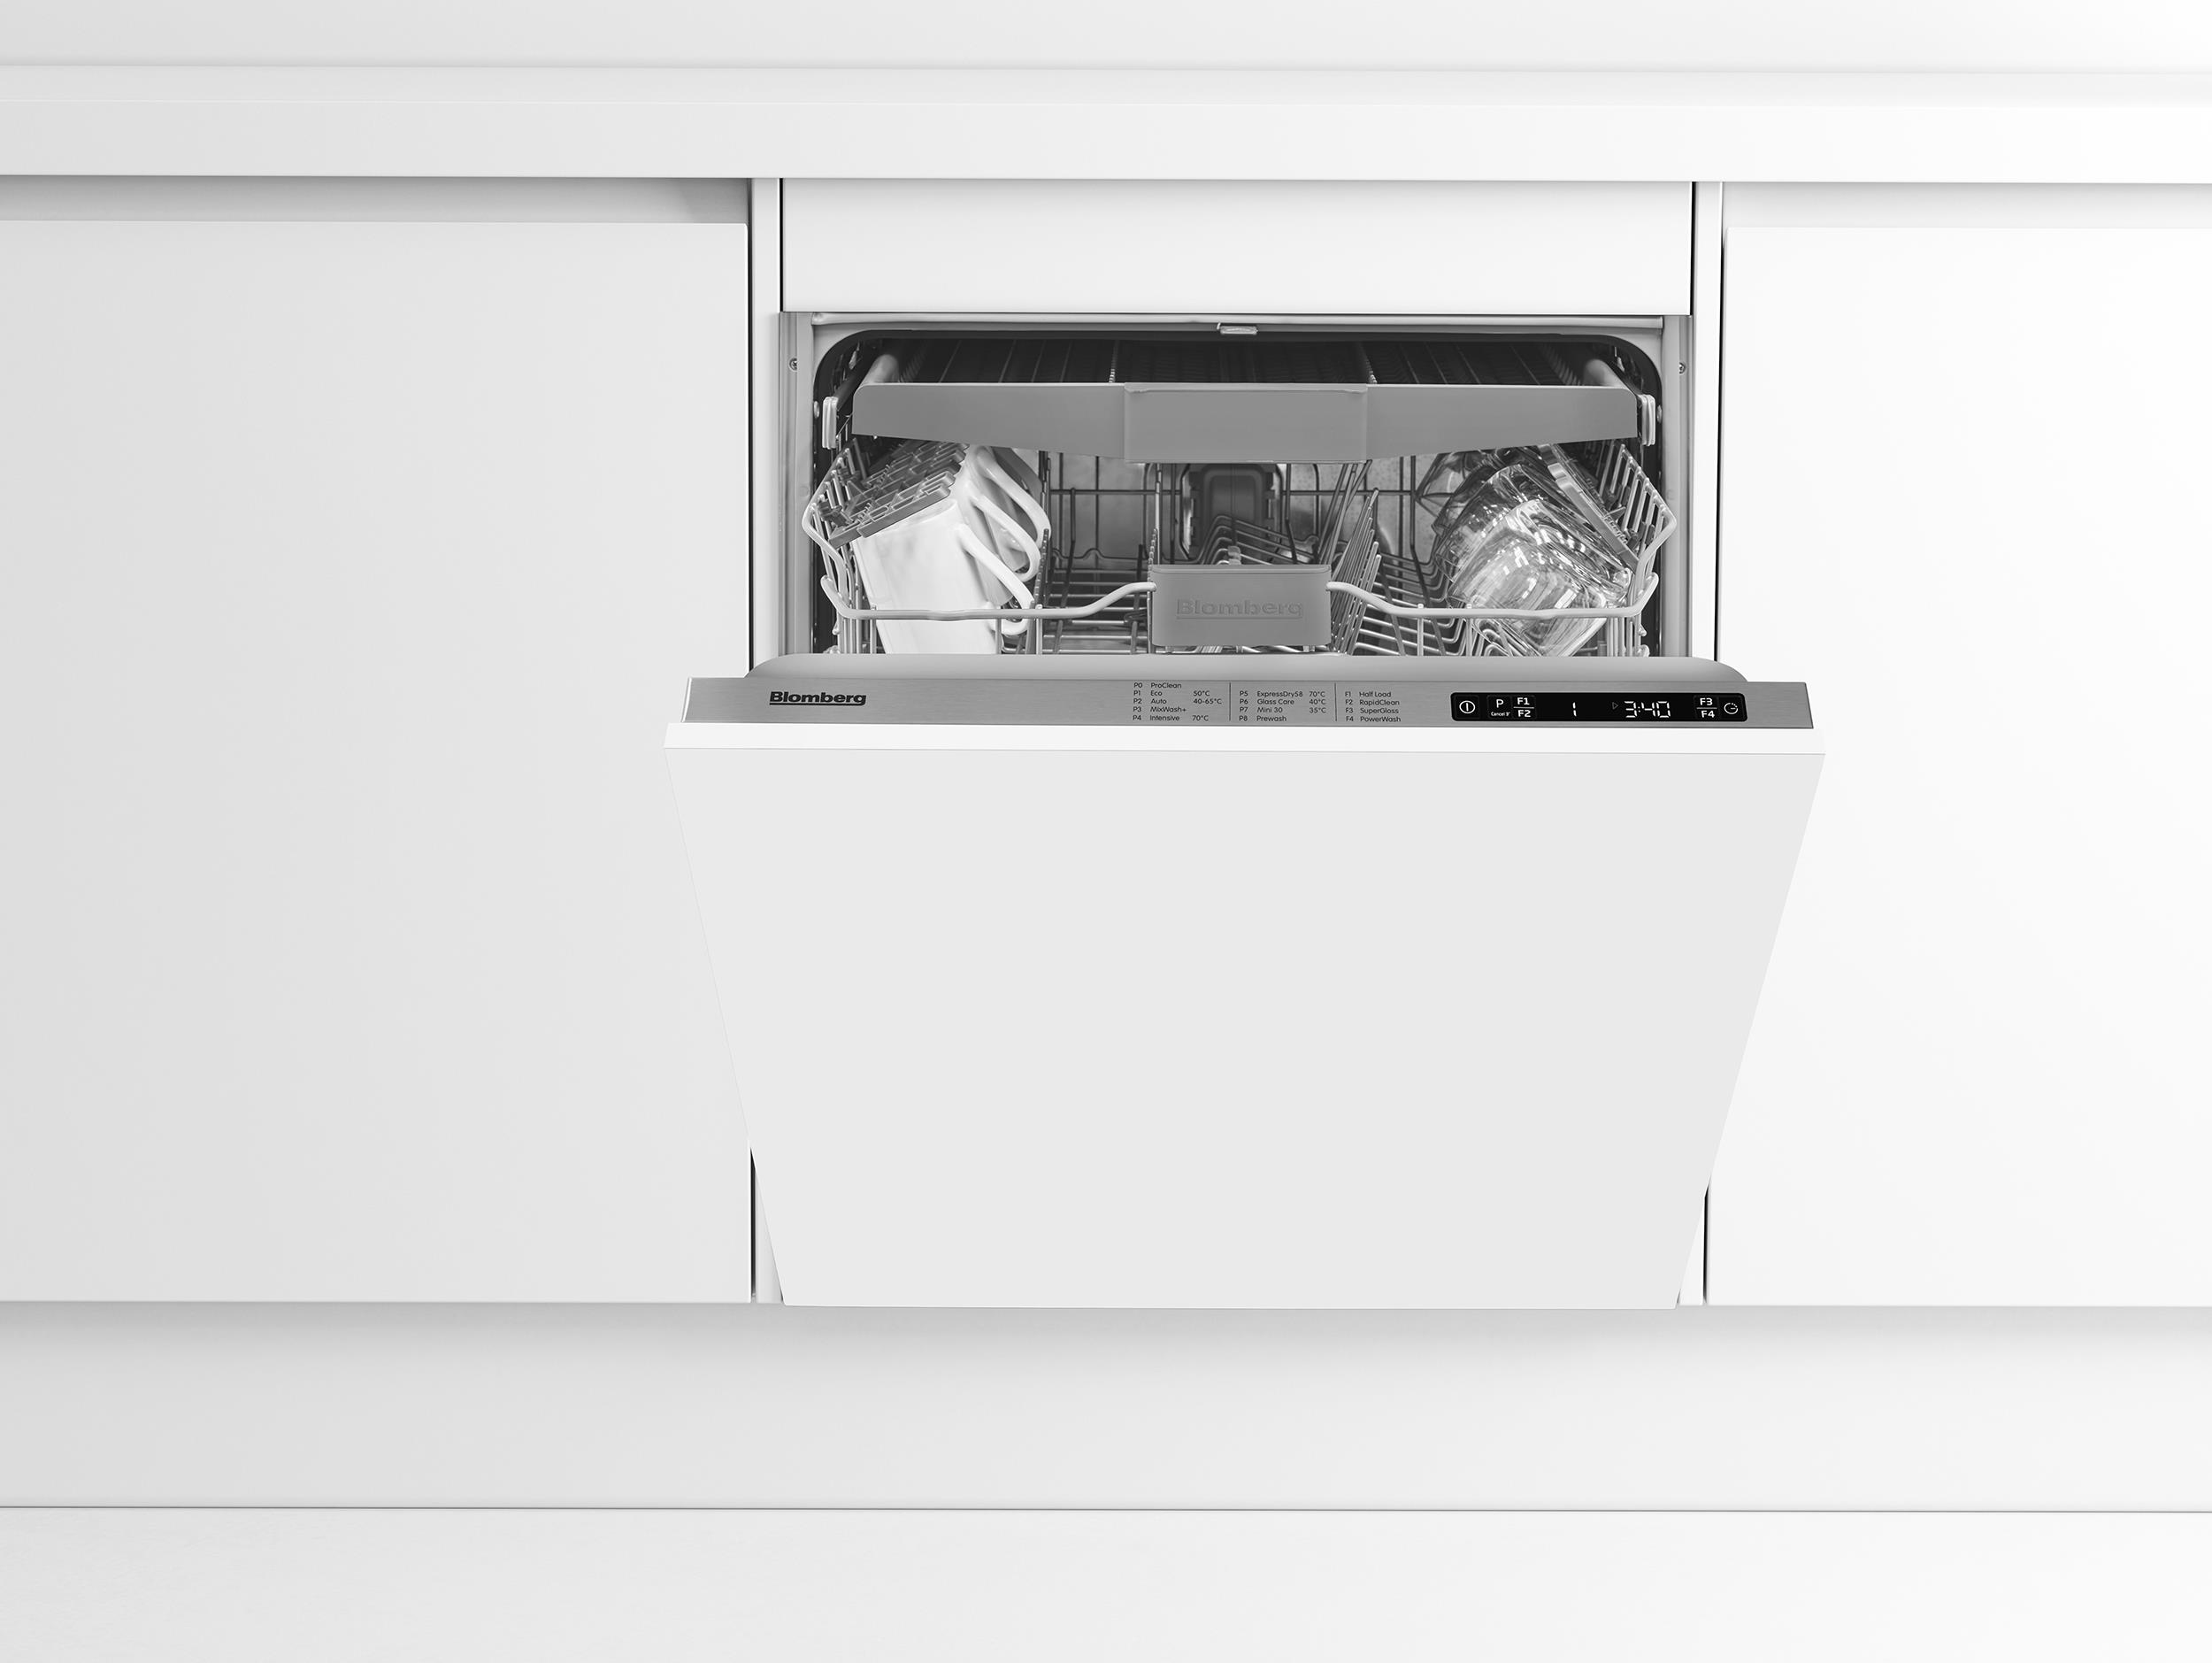 Ldv42244 Full Size Integrated Dishwasher With A Energy Rating